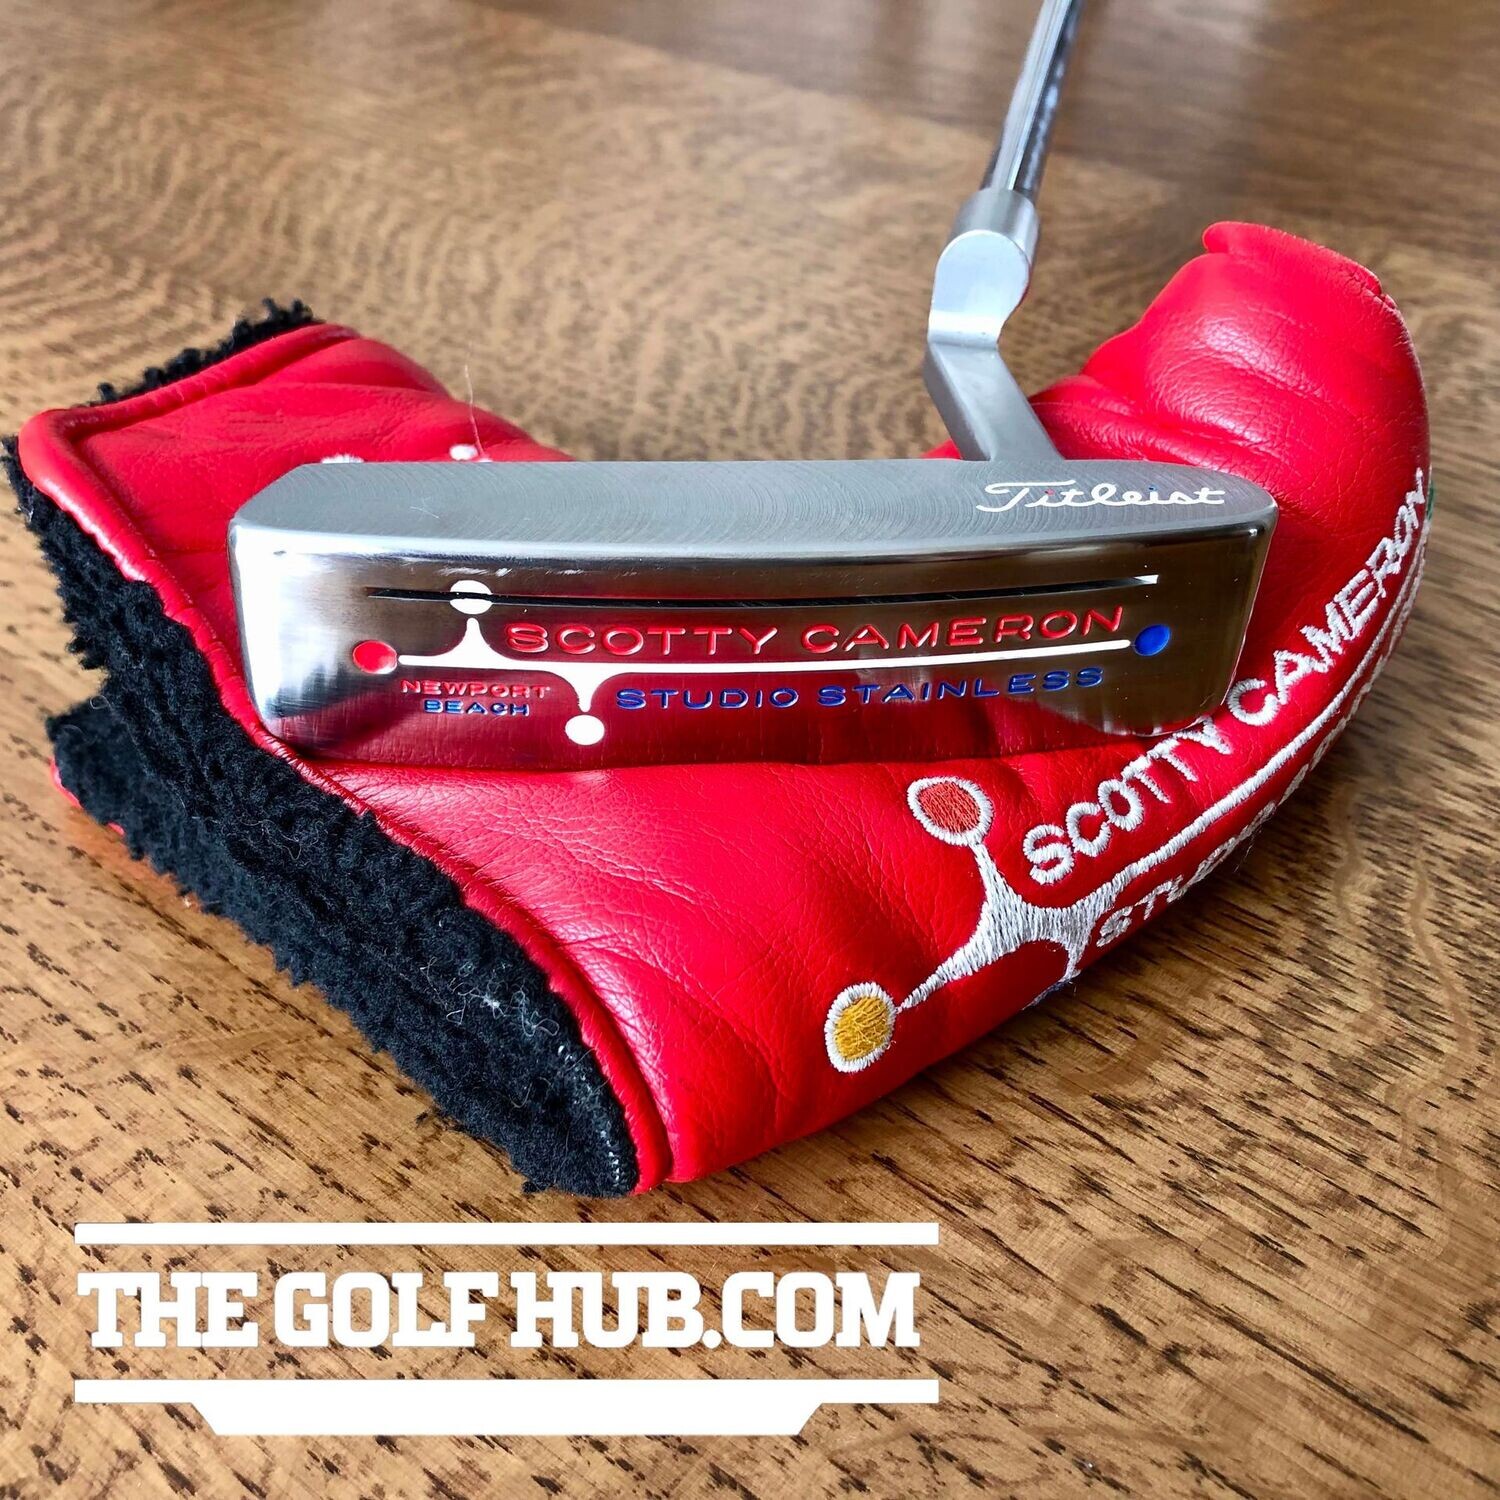 *NEW* Scotty Cameron Studio Stainless Newport Beach 35in Putter- Red Dancing 🏆✨